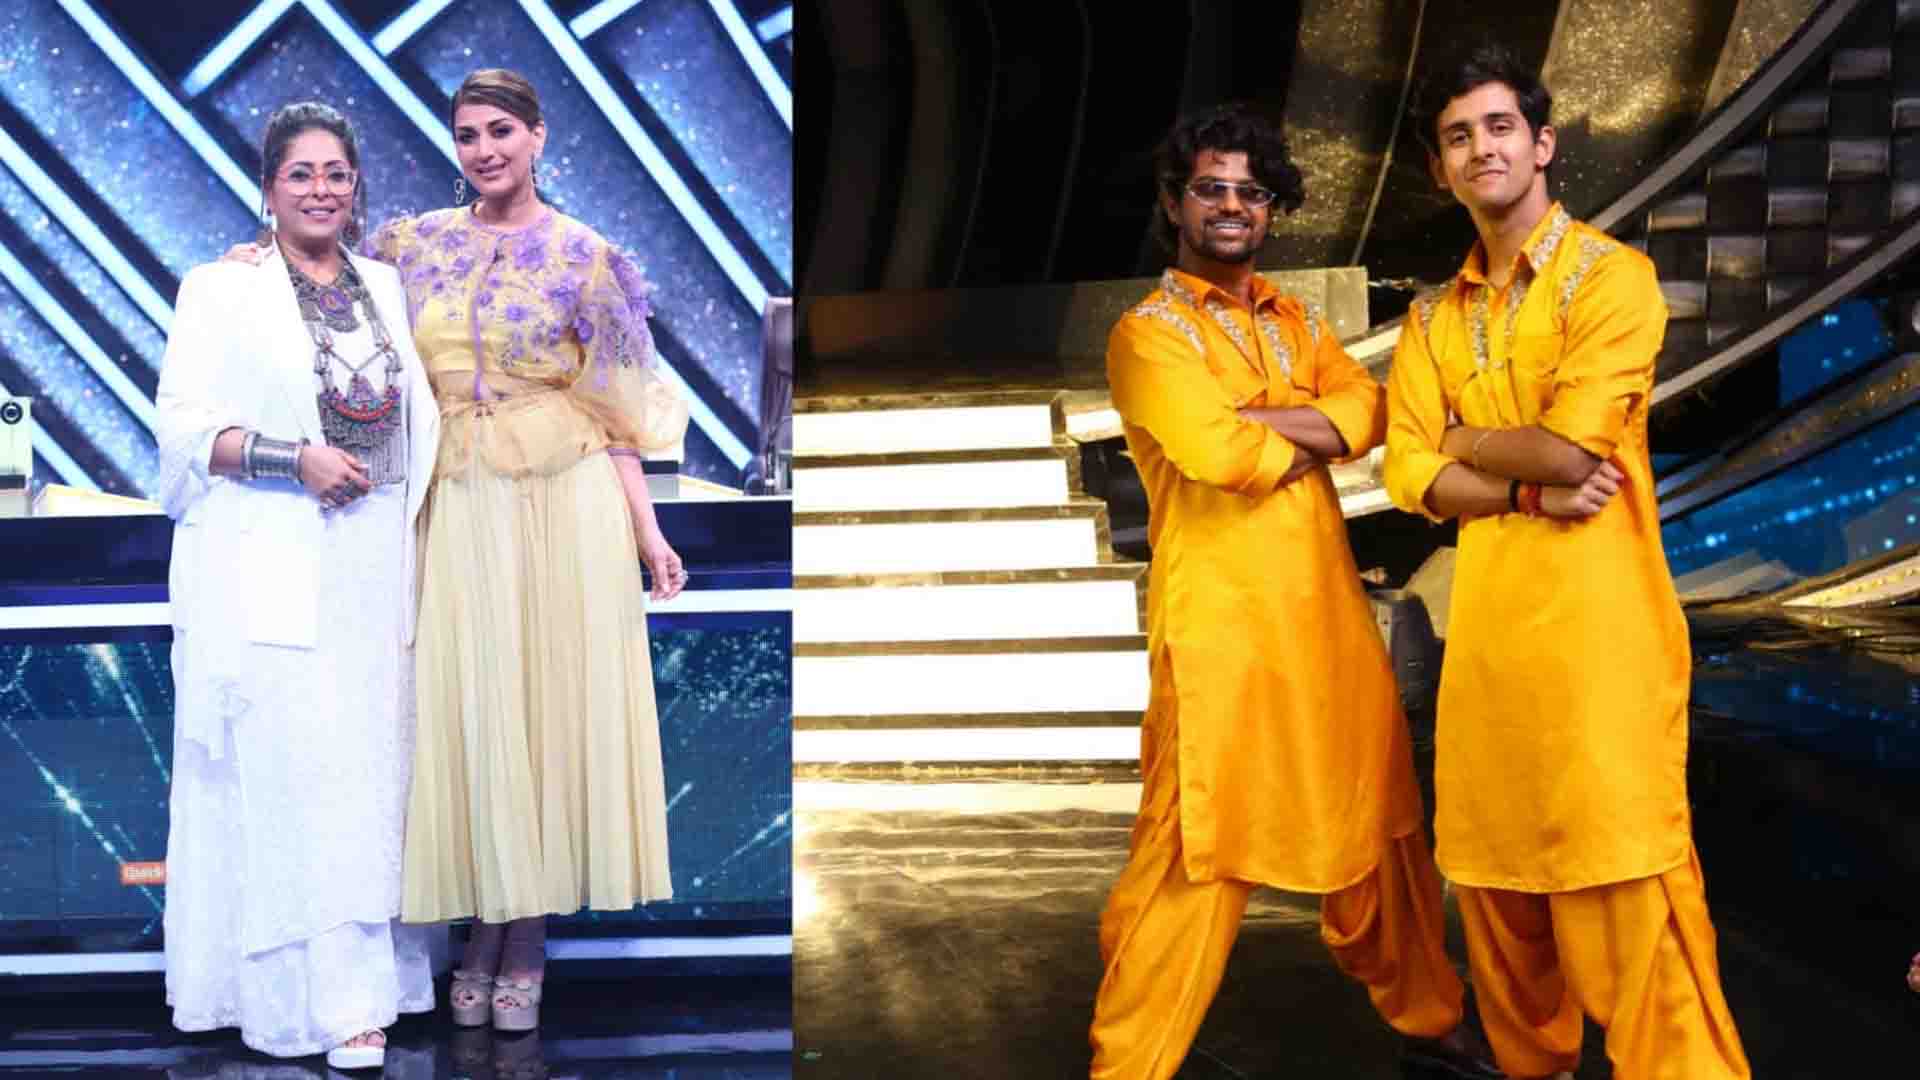 On India’s Best Dancer 3, Geeta Kapur compliments Shivanshu Soni for his soulful performance, saying, “This new andaaz of yours is simply outstanding.”